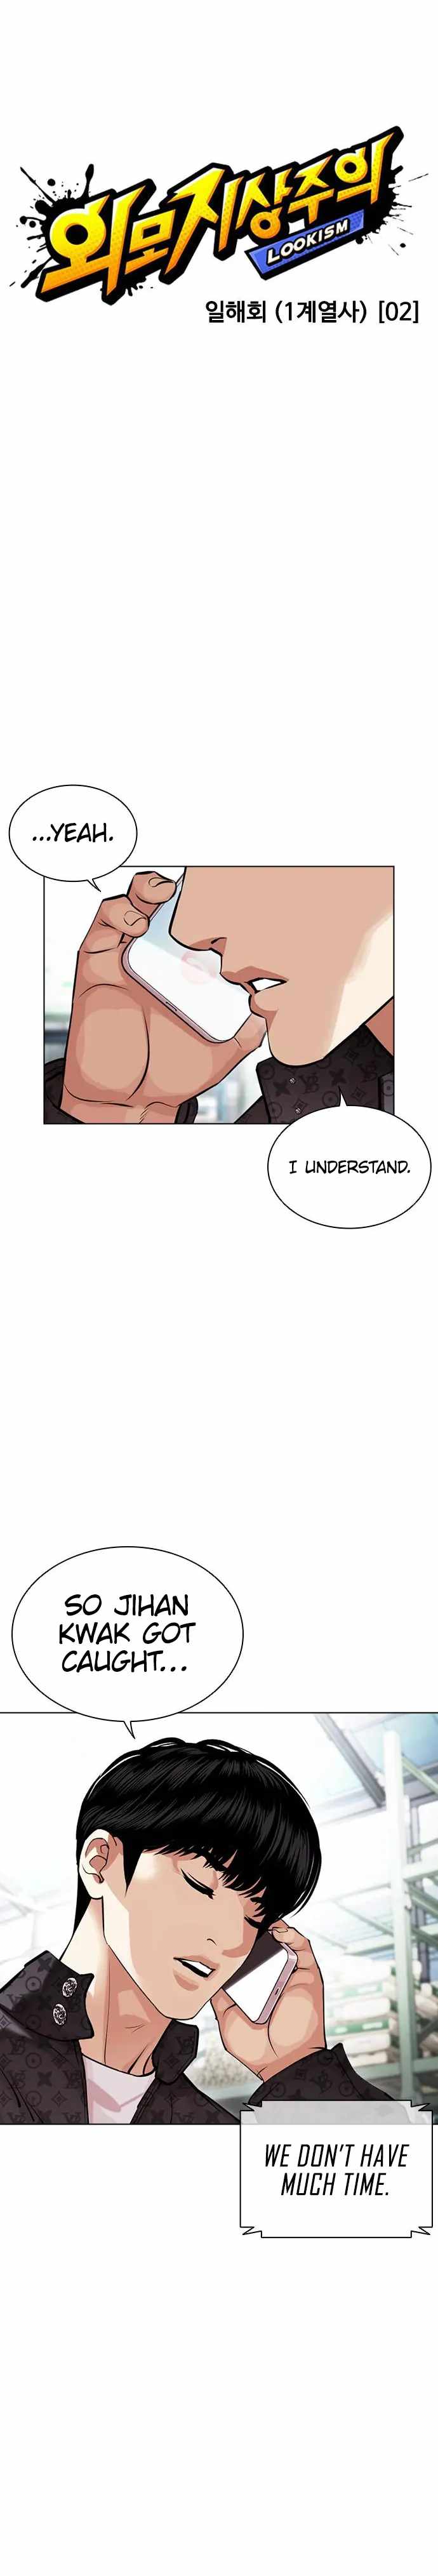 Lookism Chapter 450 image 12